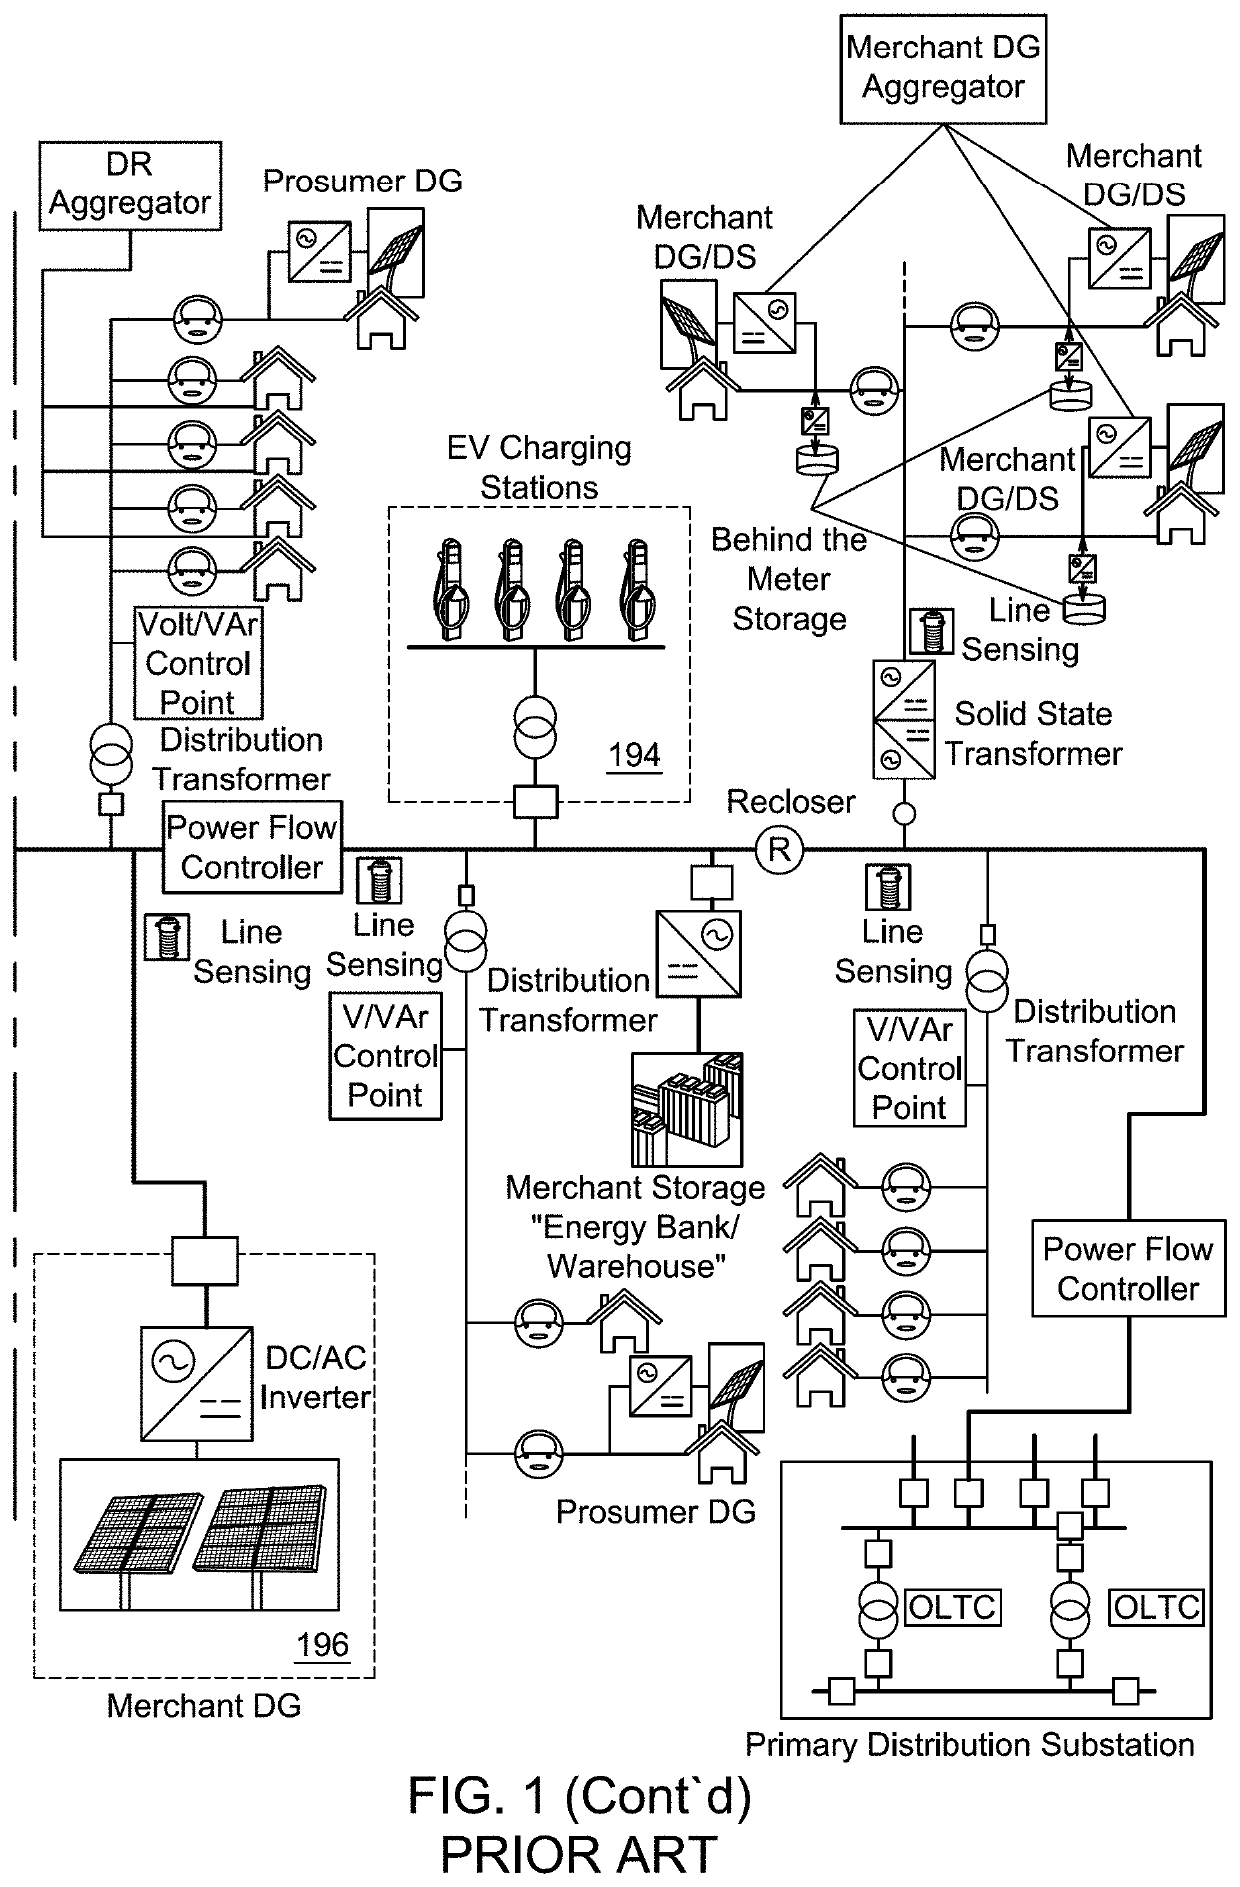 Distribution grid fault analysis under load and renewable energy uncertainties